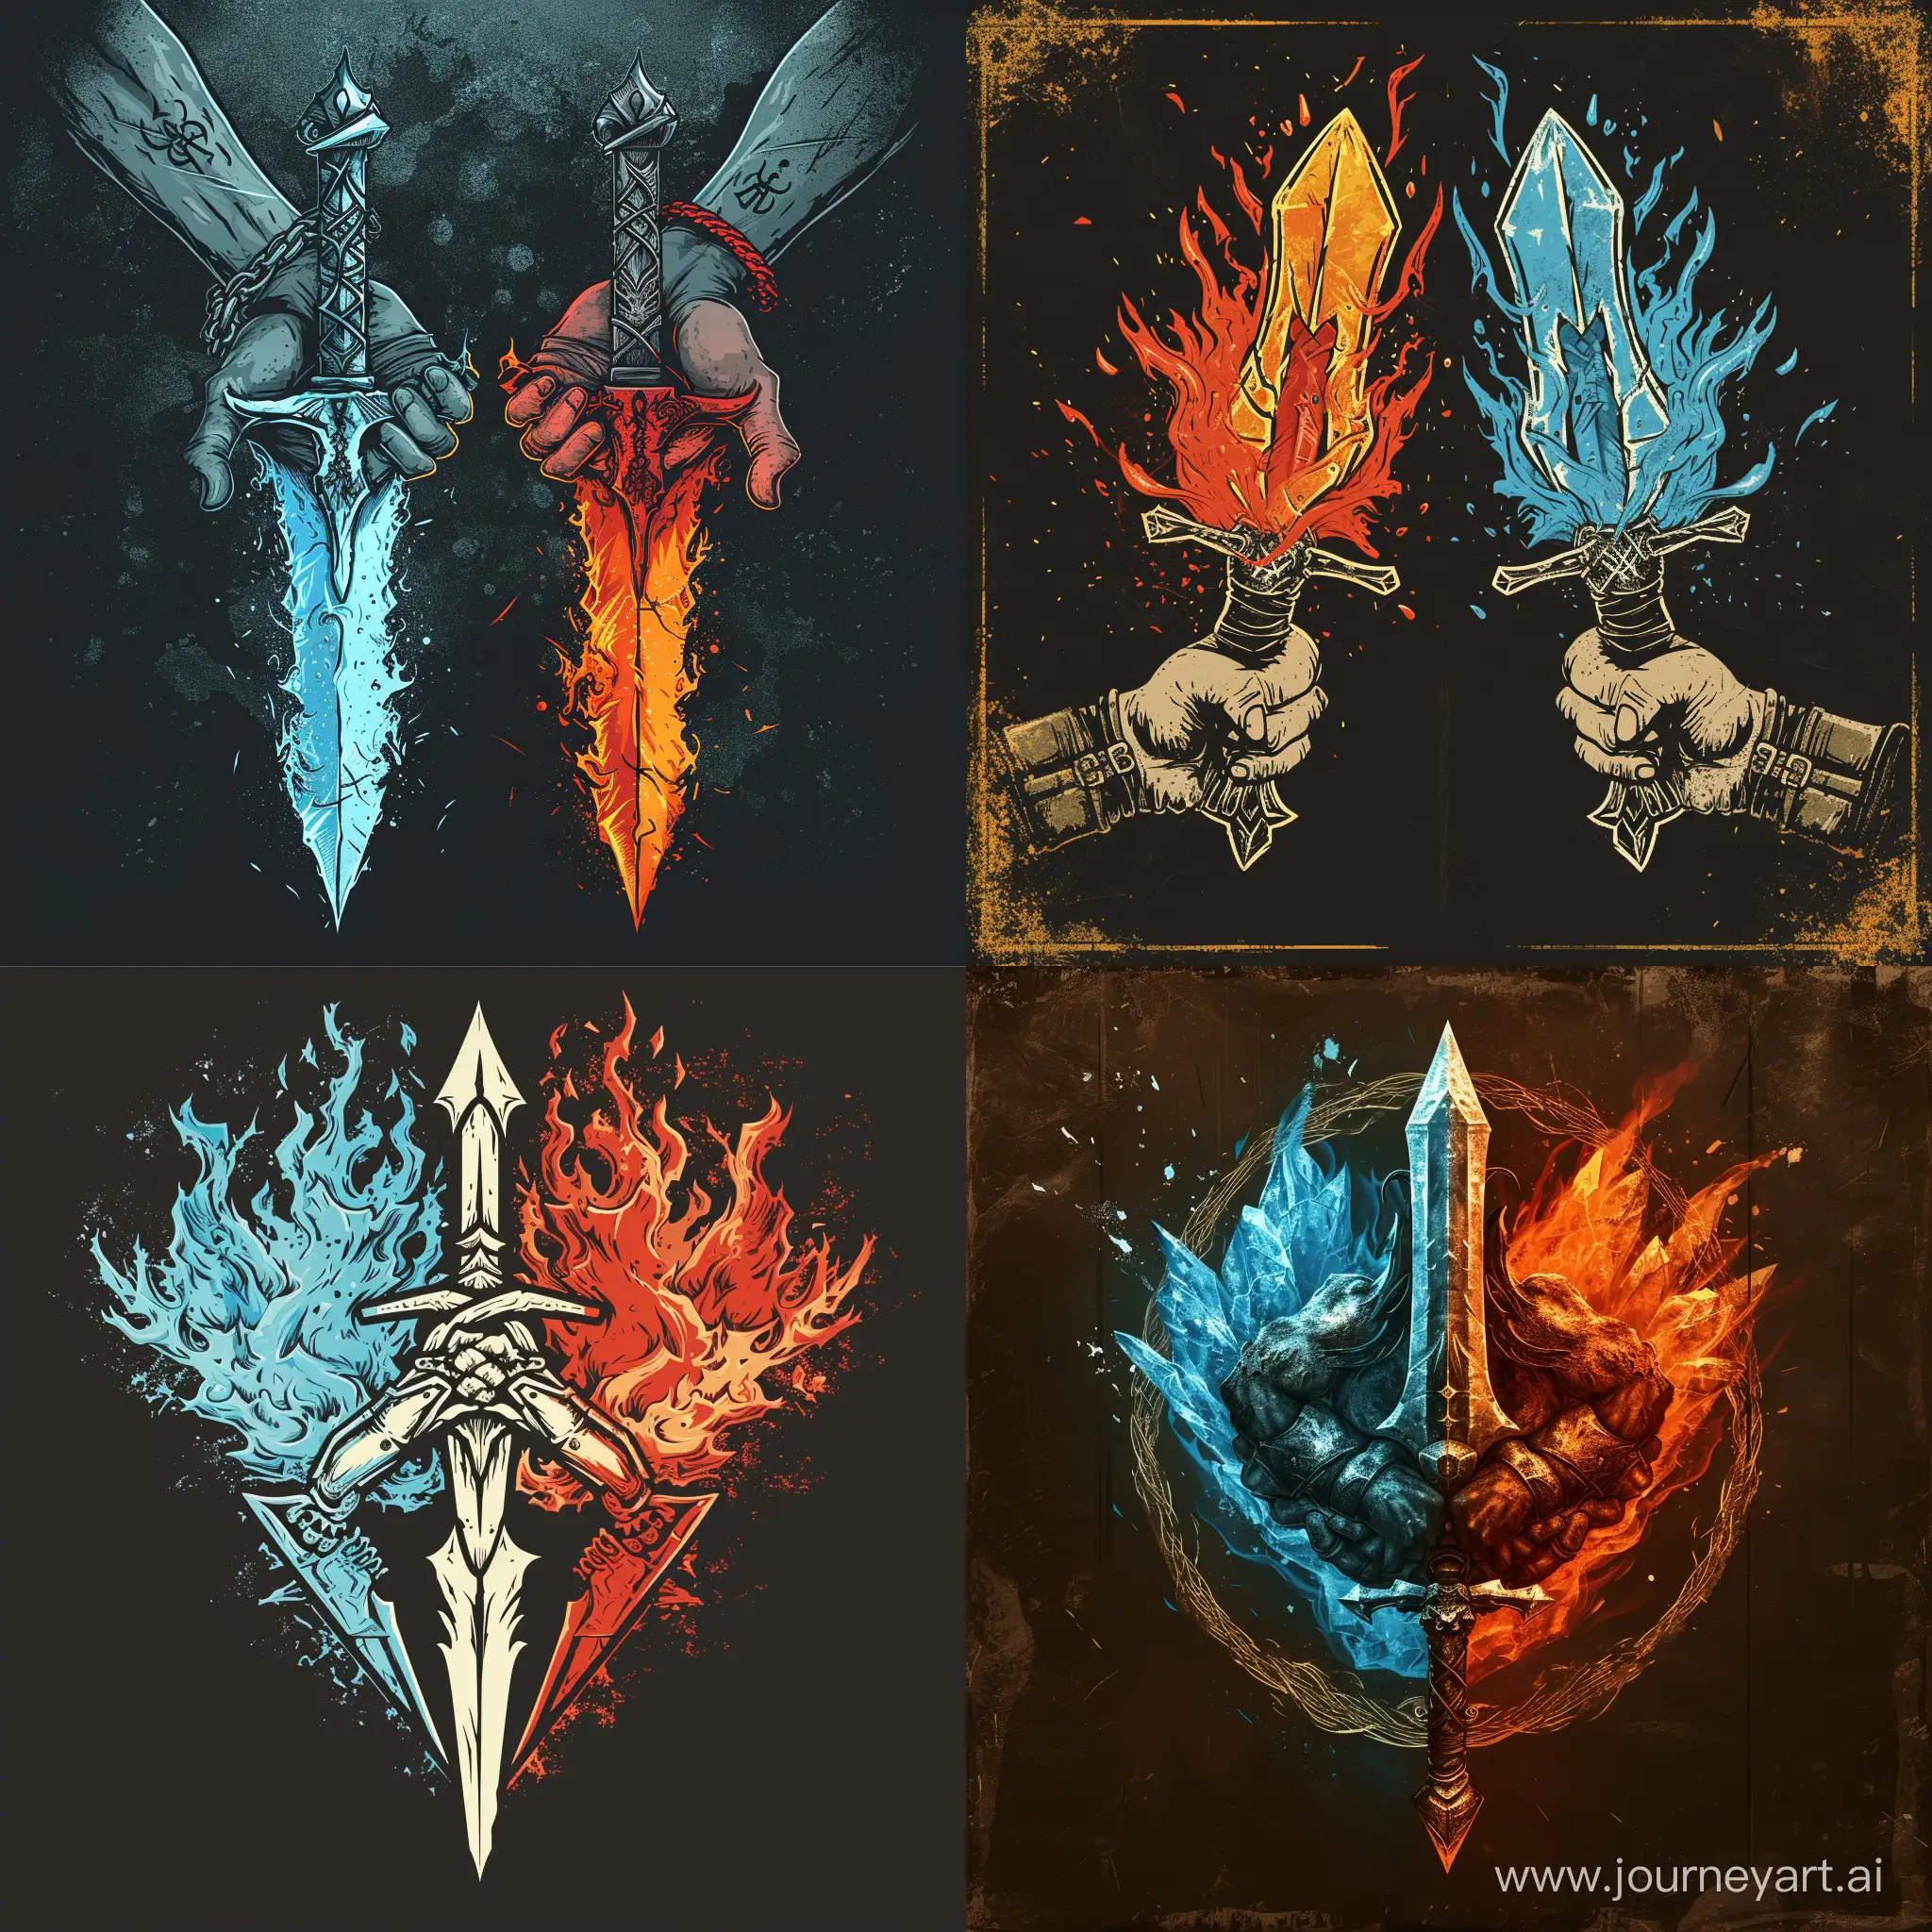 Rival-Brothers-Unveil-Ice-and-Fire-Daggers-in-Criminal-Gang-Symbol